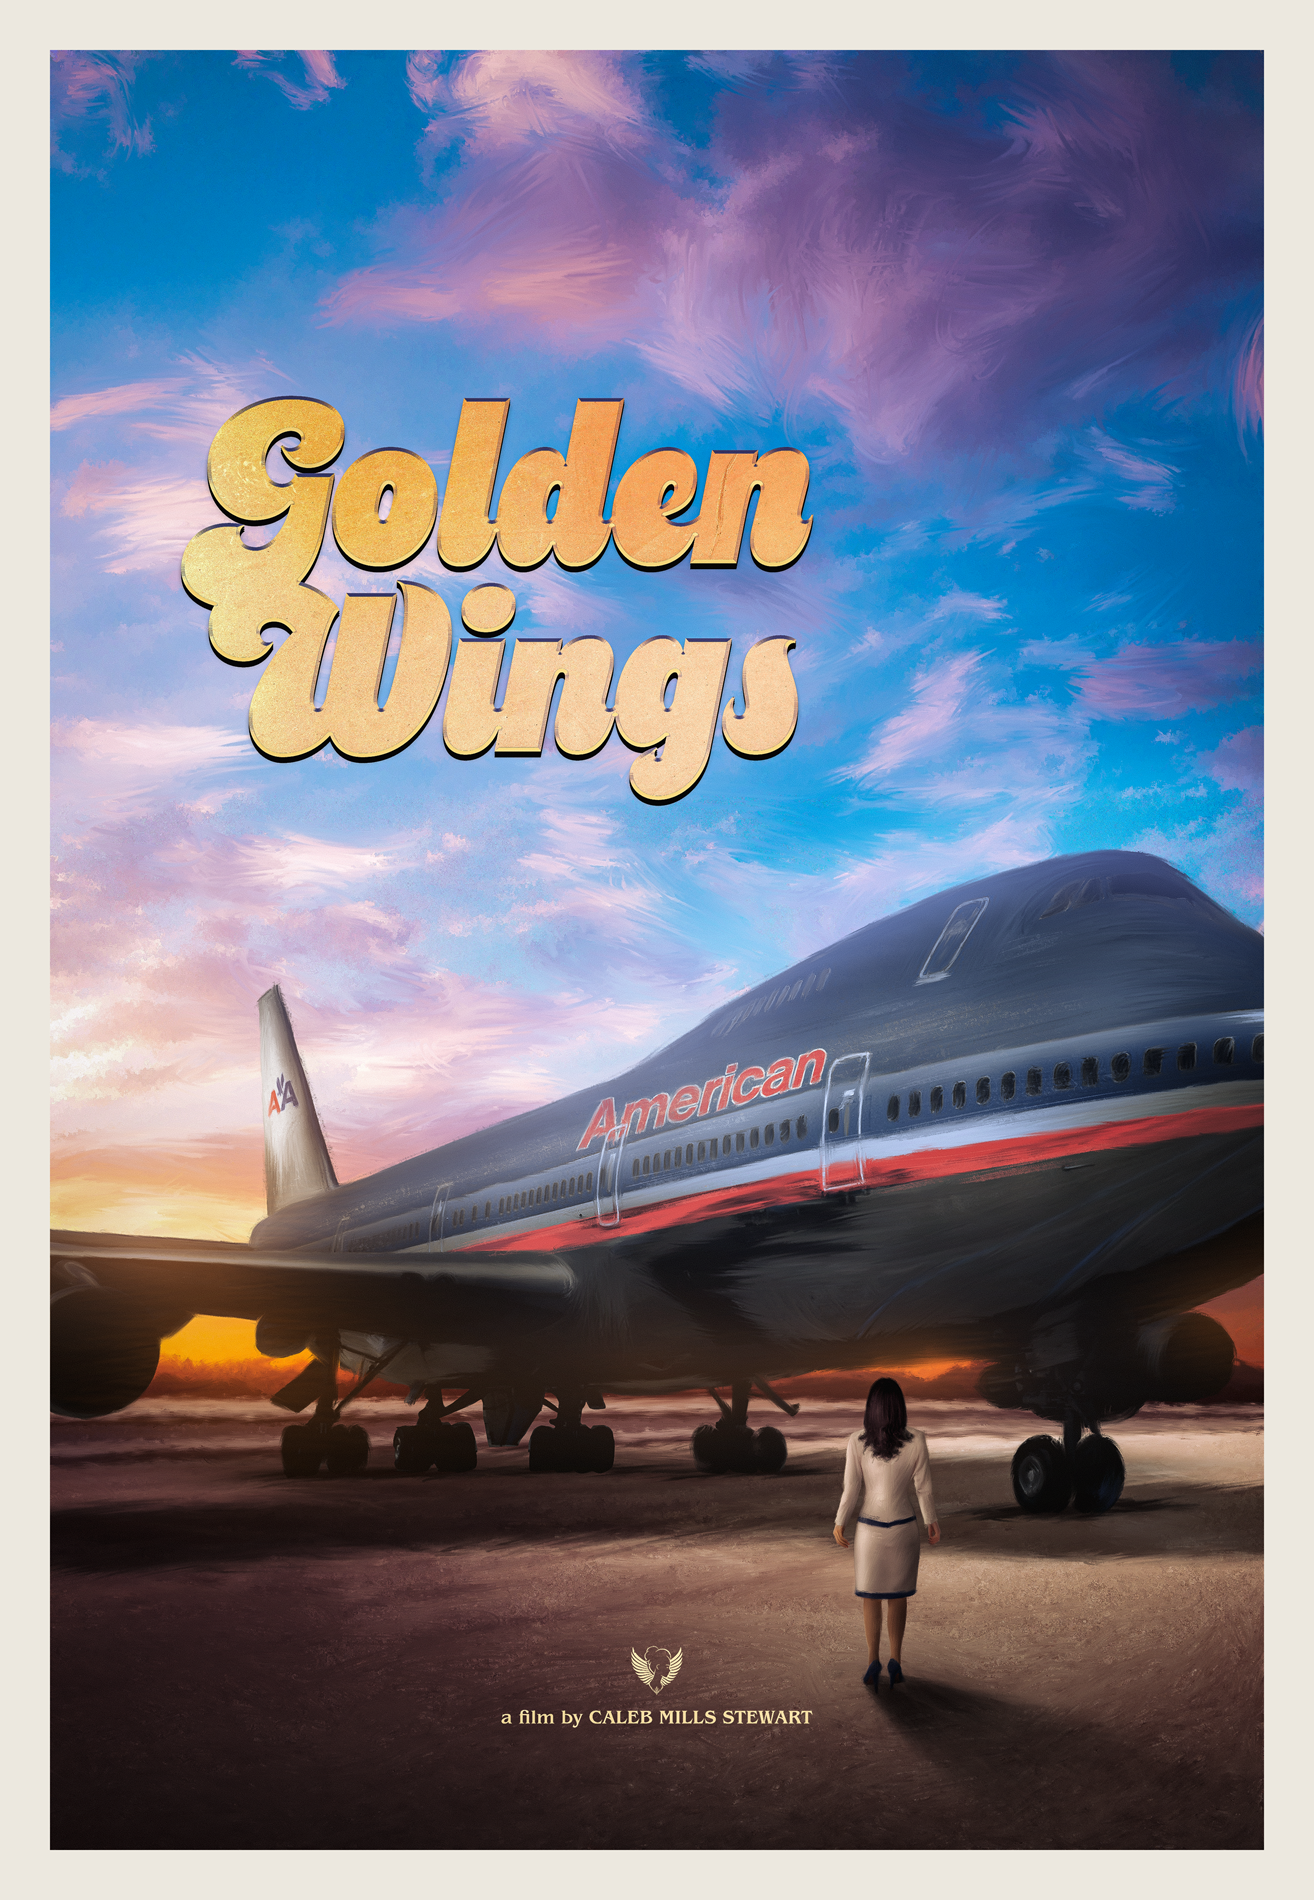 Award-Winning Documentary "Golden Wings" Chronicles 50 Years of Aviation Adventures 